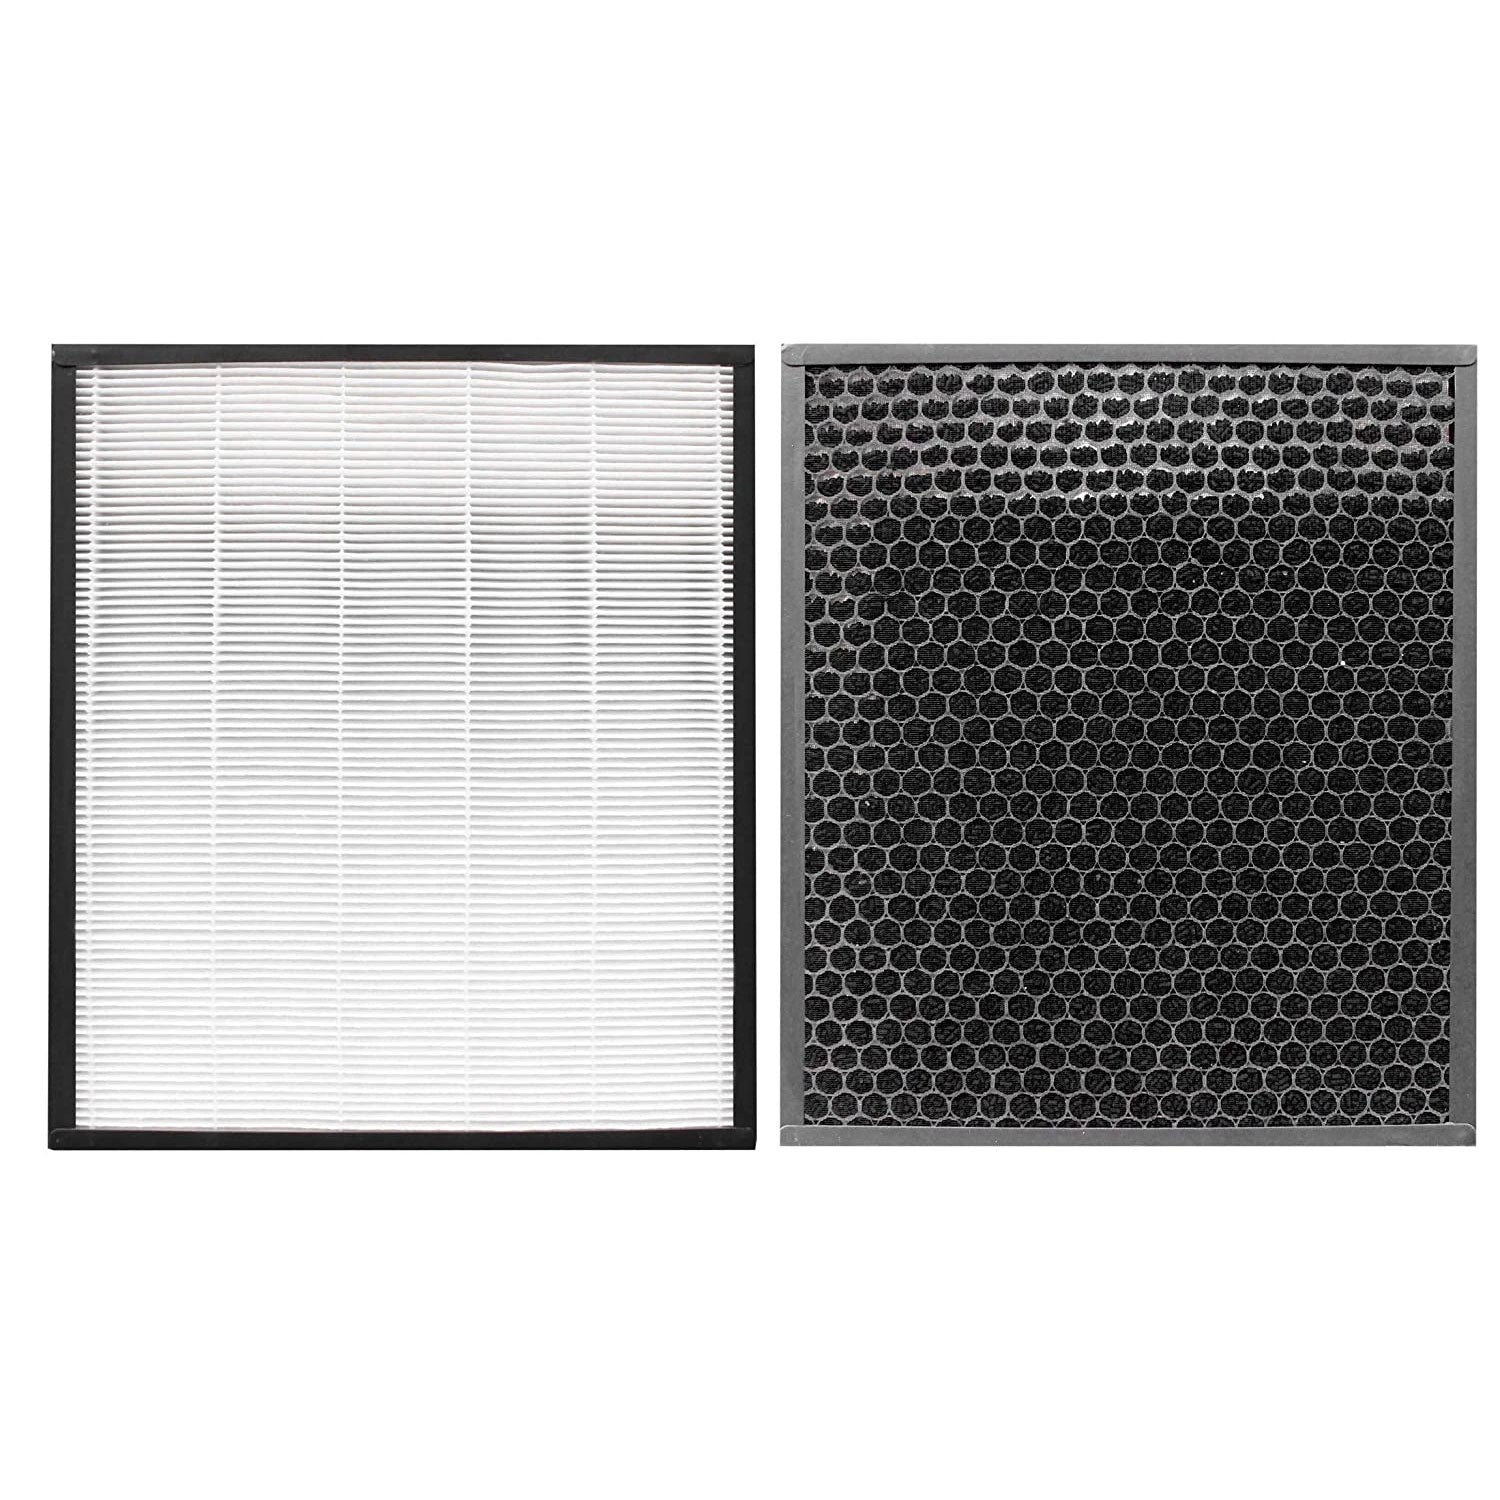 LEVOIT LV-PUR131 Air Purifier Replacement Filter, Hepa and Activated Carbon  Filters Set, LV-PUR131-RF, 1 Pack